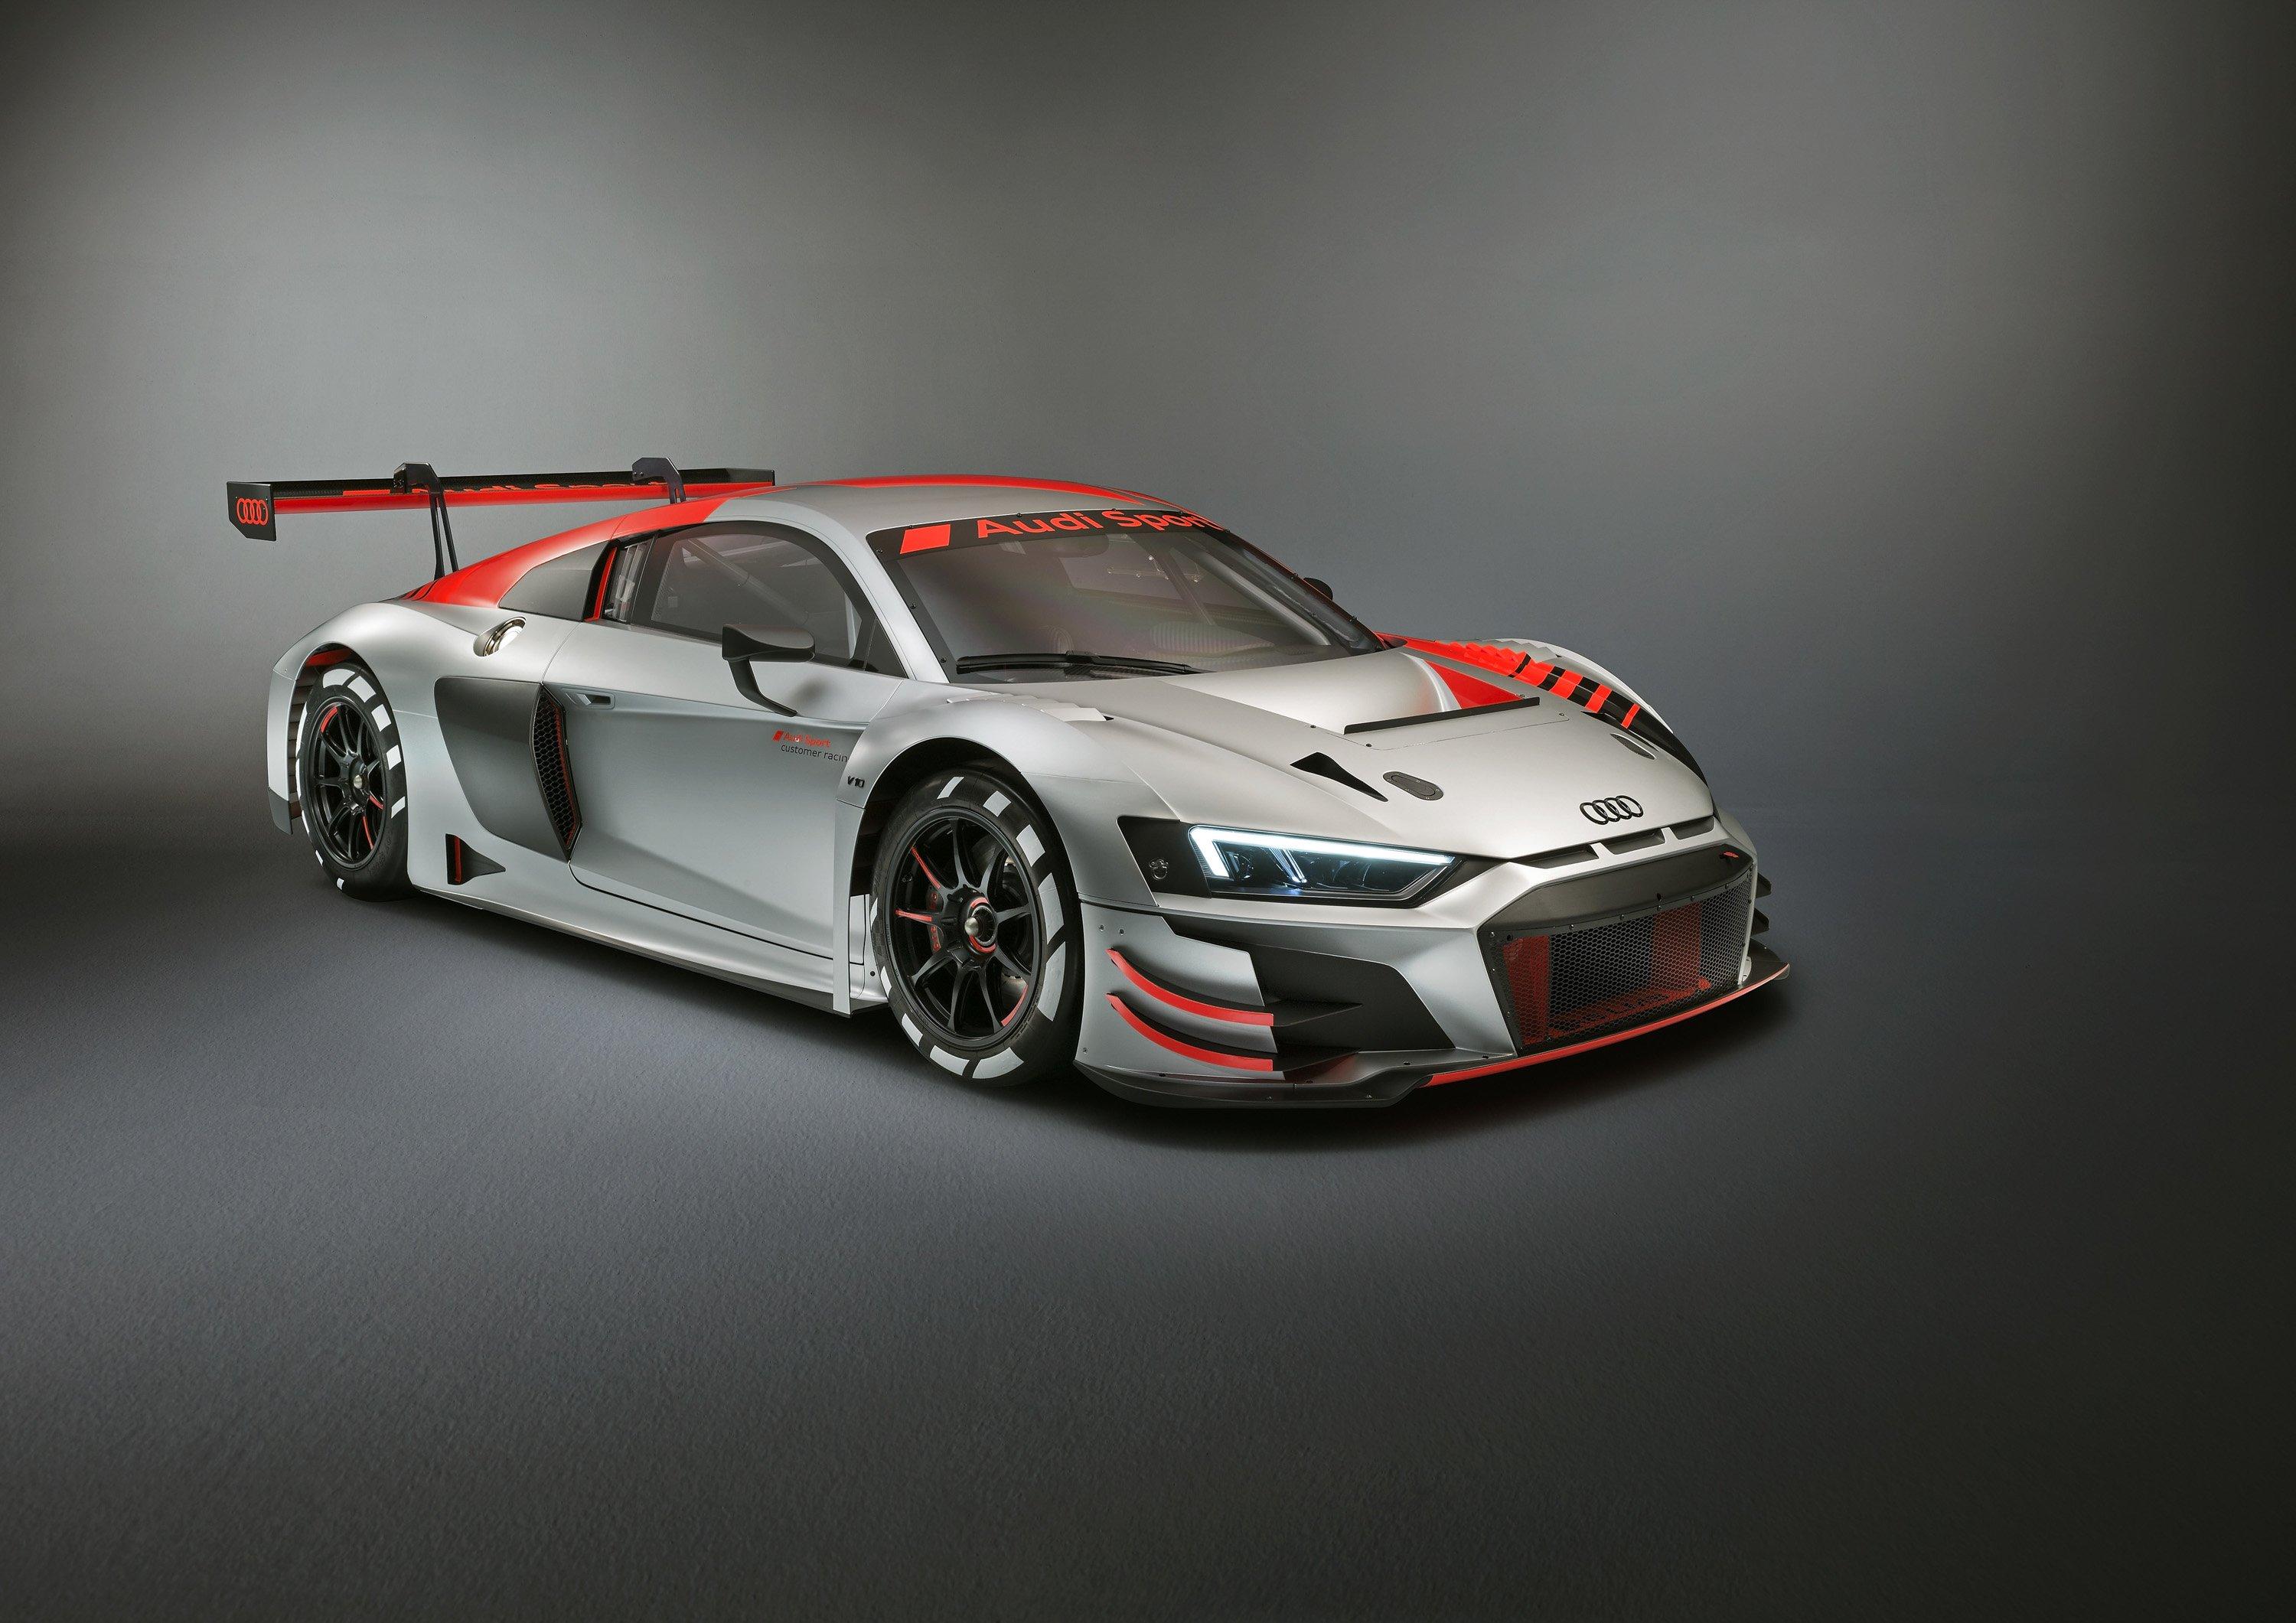 The 2020 Audi R8 LMS GT2 Is The R8 We Deserve For The Road